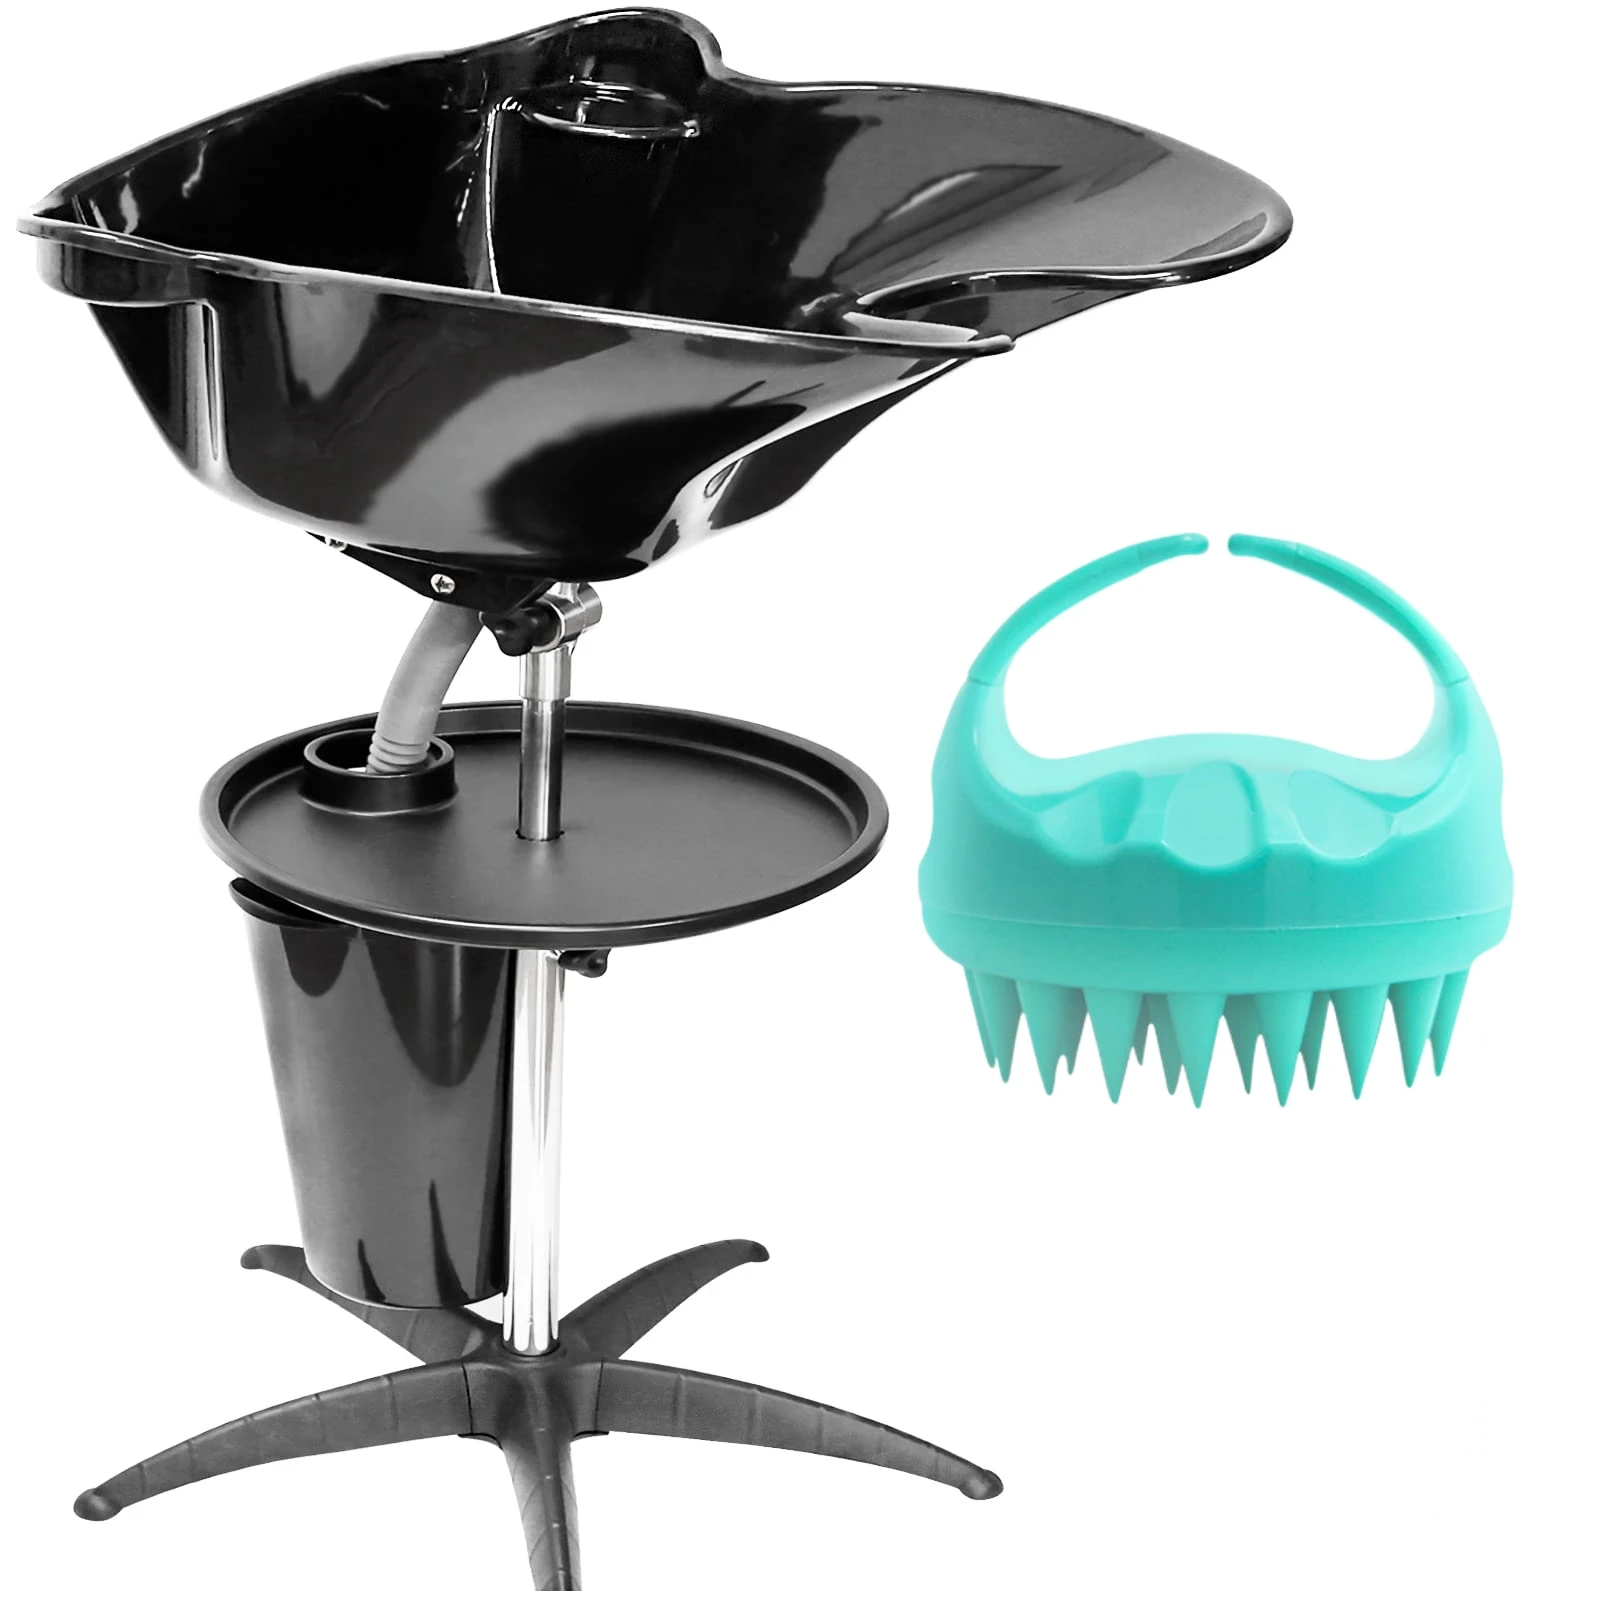 Backwash Bowl Salon Basin Shampoo Sink with Drain Portable Stainless Steel Pipe Support Adjustable Height Barbershops Hair